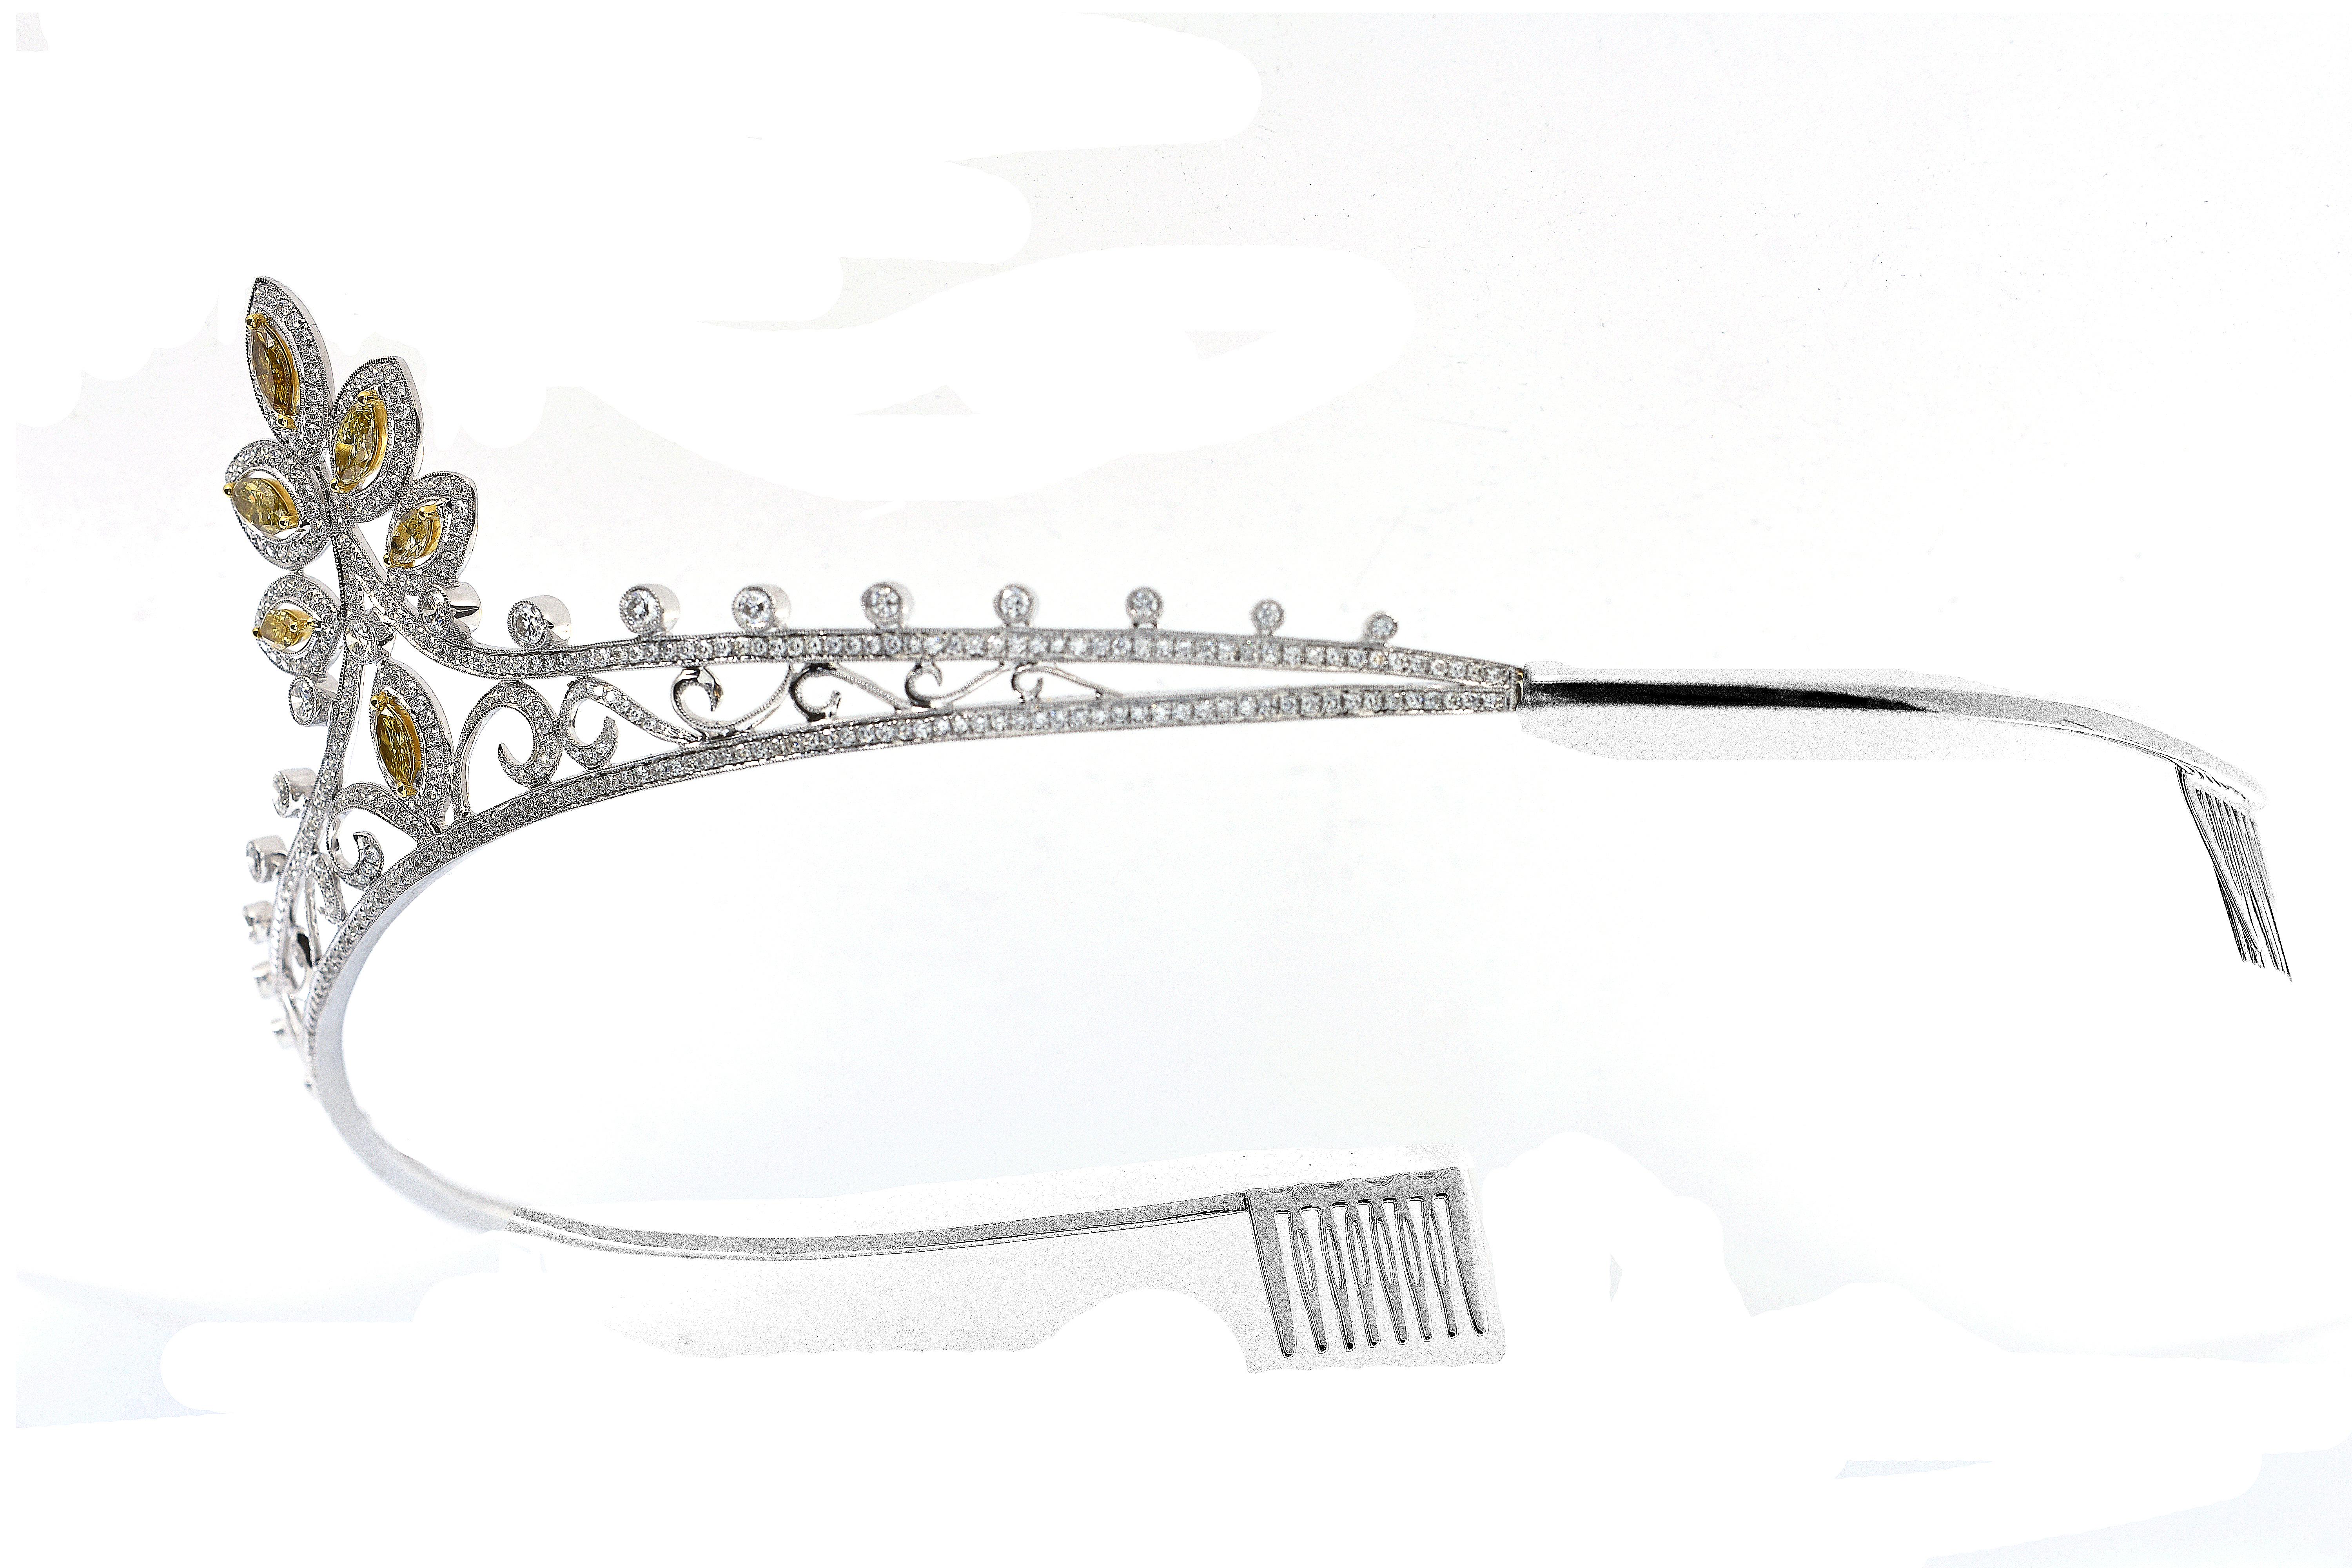 Our 6.72 Carat Fancy Yellow Marquise Cut Diamond And White Diamond Tiara made by Shimon's Creations will make you feel like a princess as you wear it. Every diamond in this exceptional royal looking tiara is developed to achieve a natural beauty of